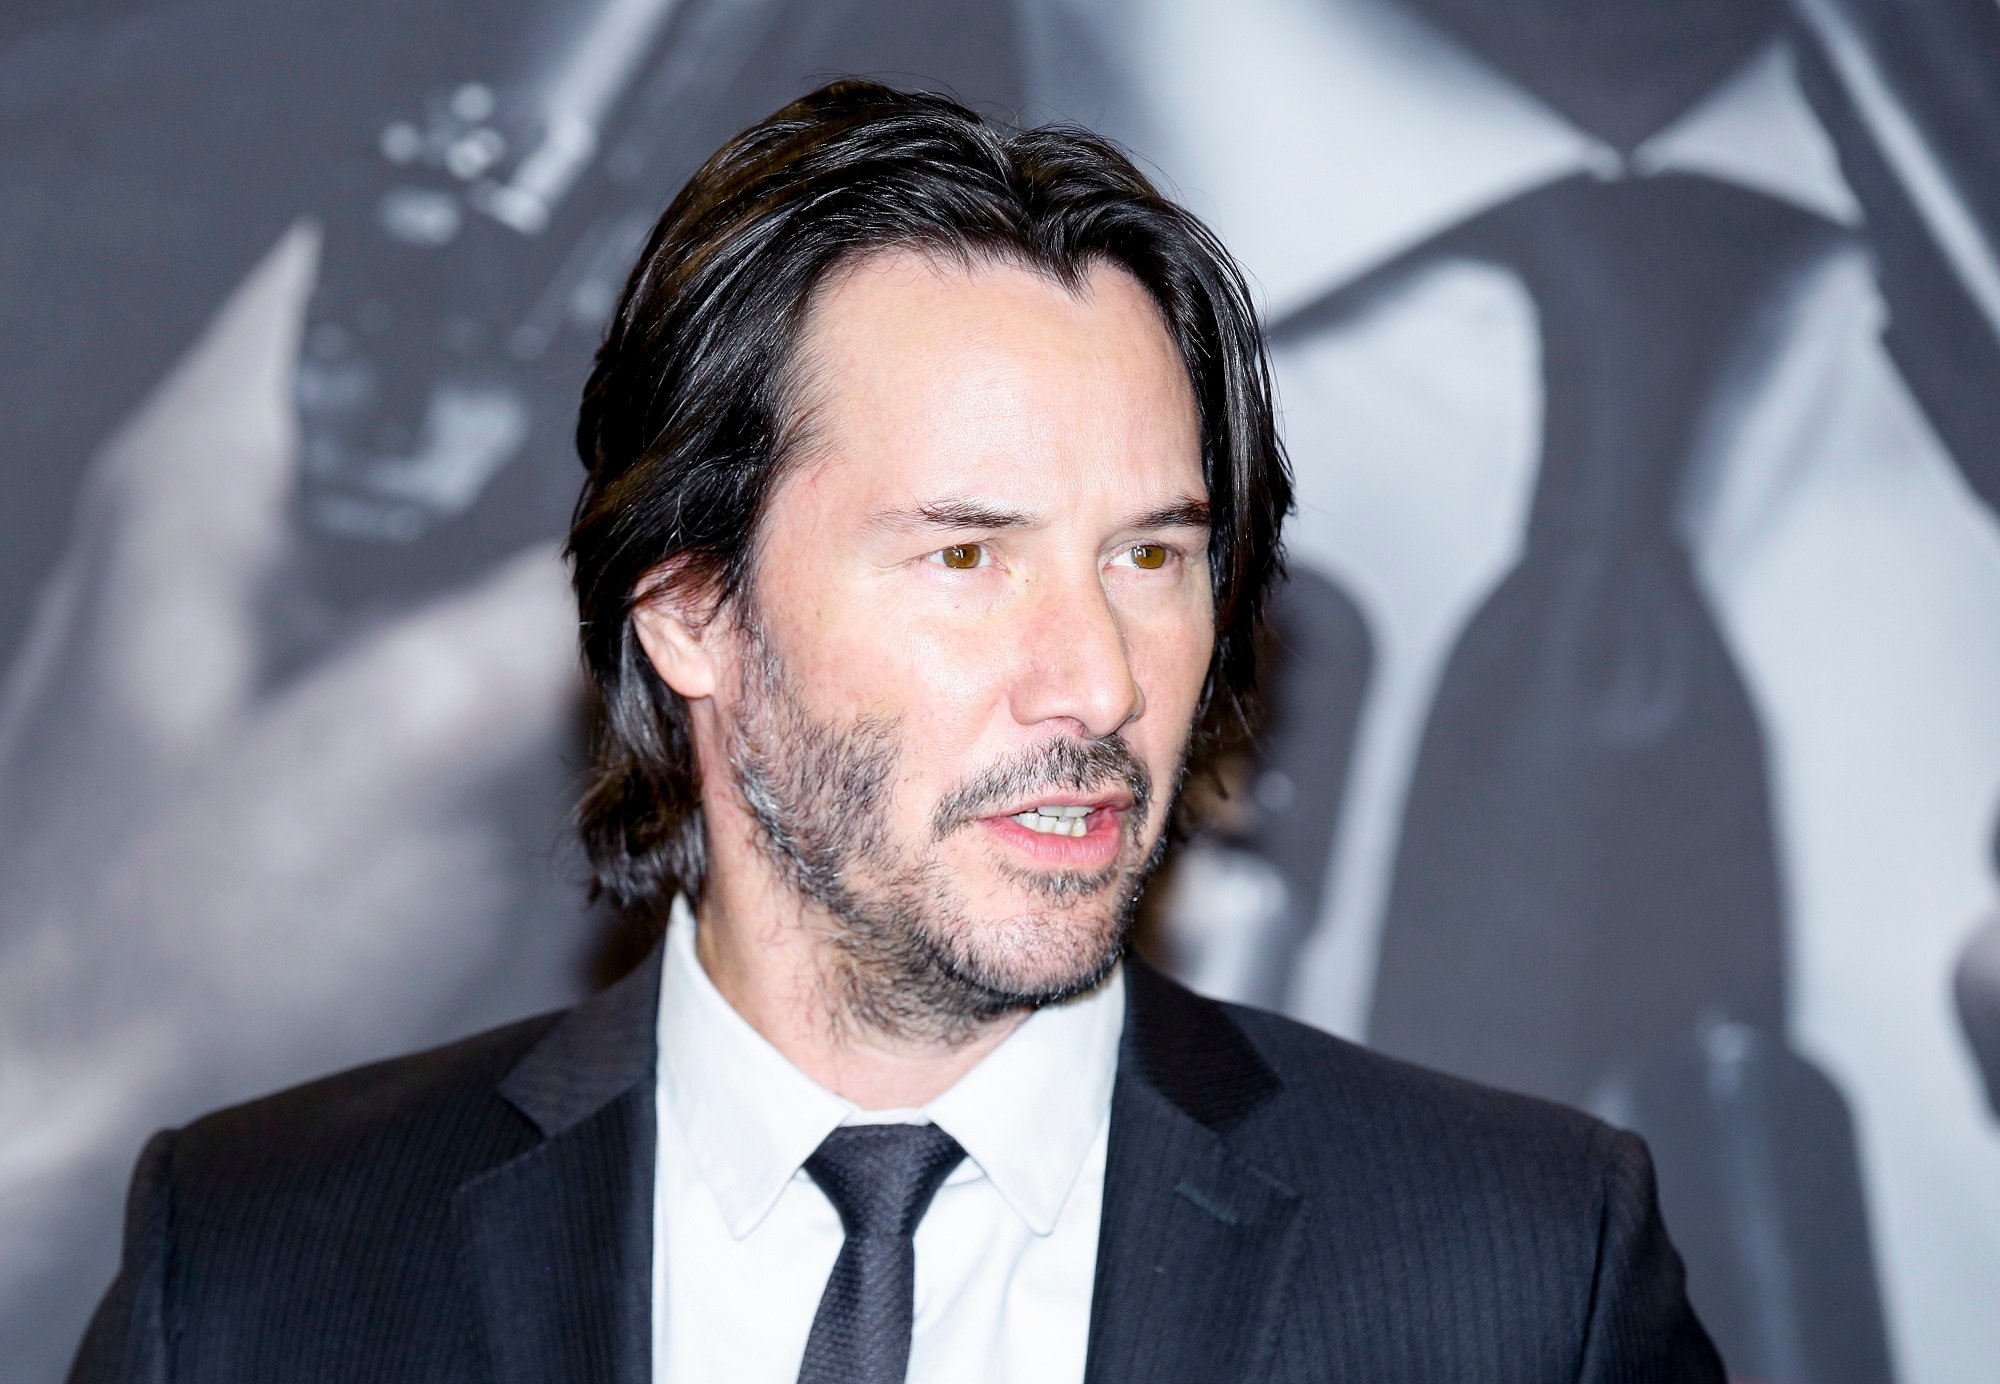 Keanu Reeves wears a suit at the John Wick 2 premiere